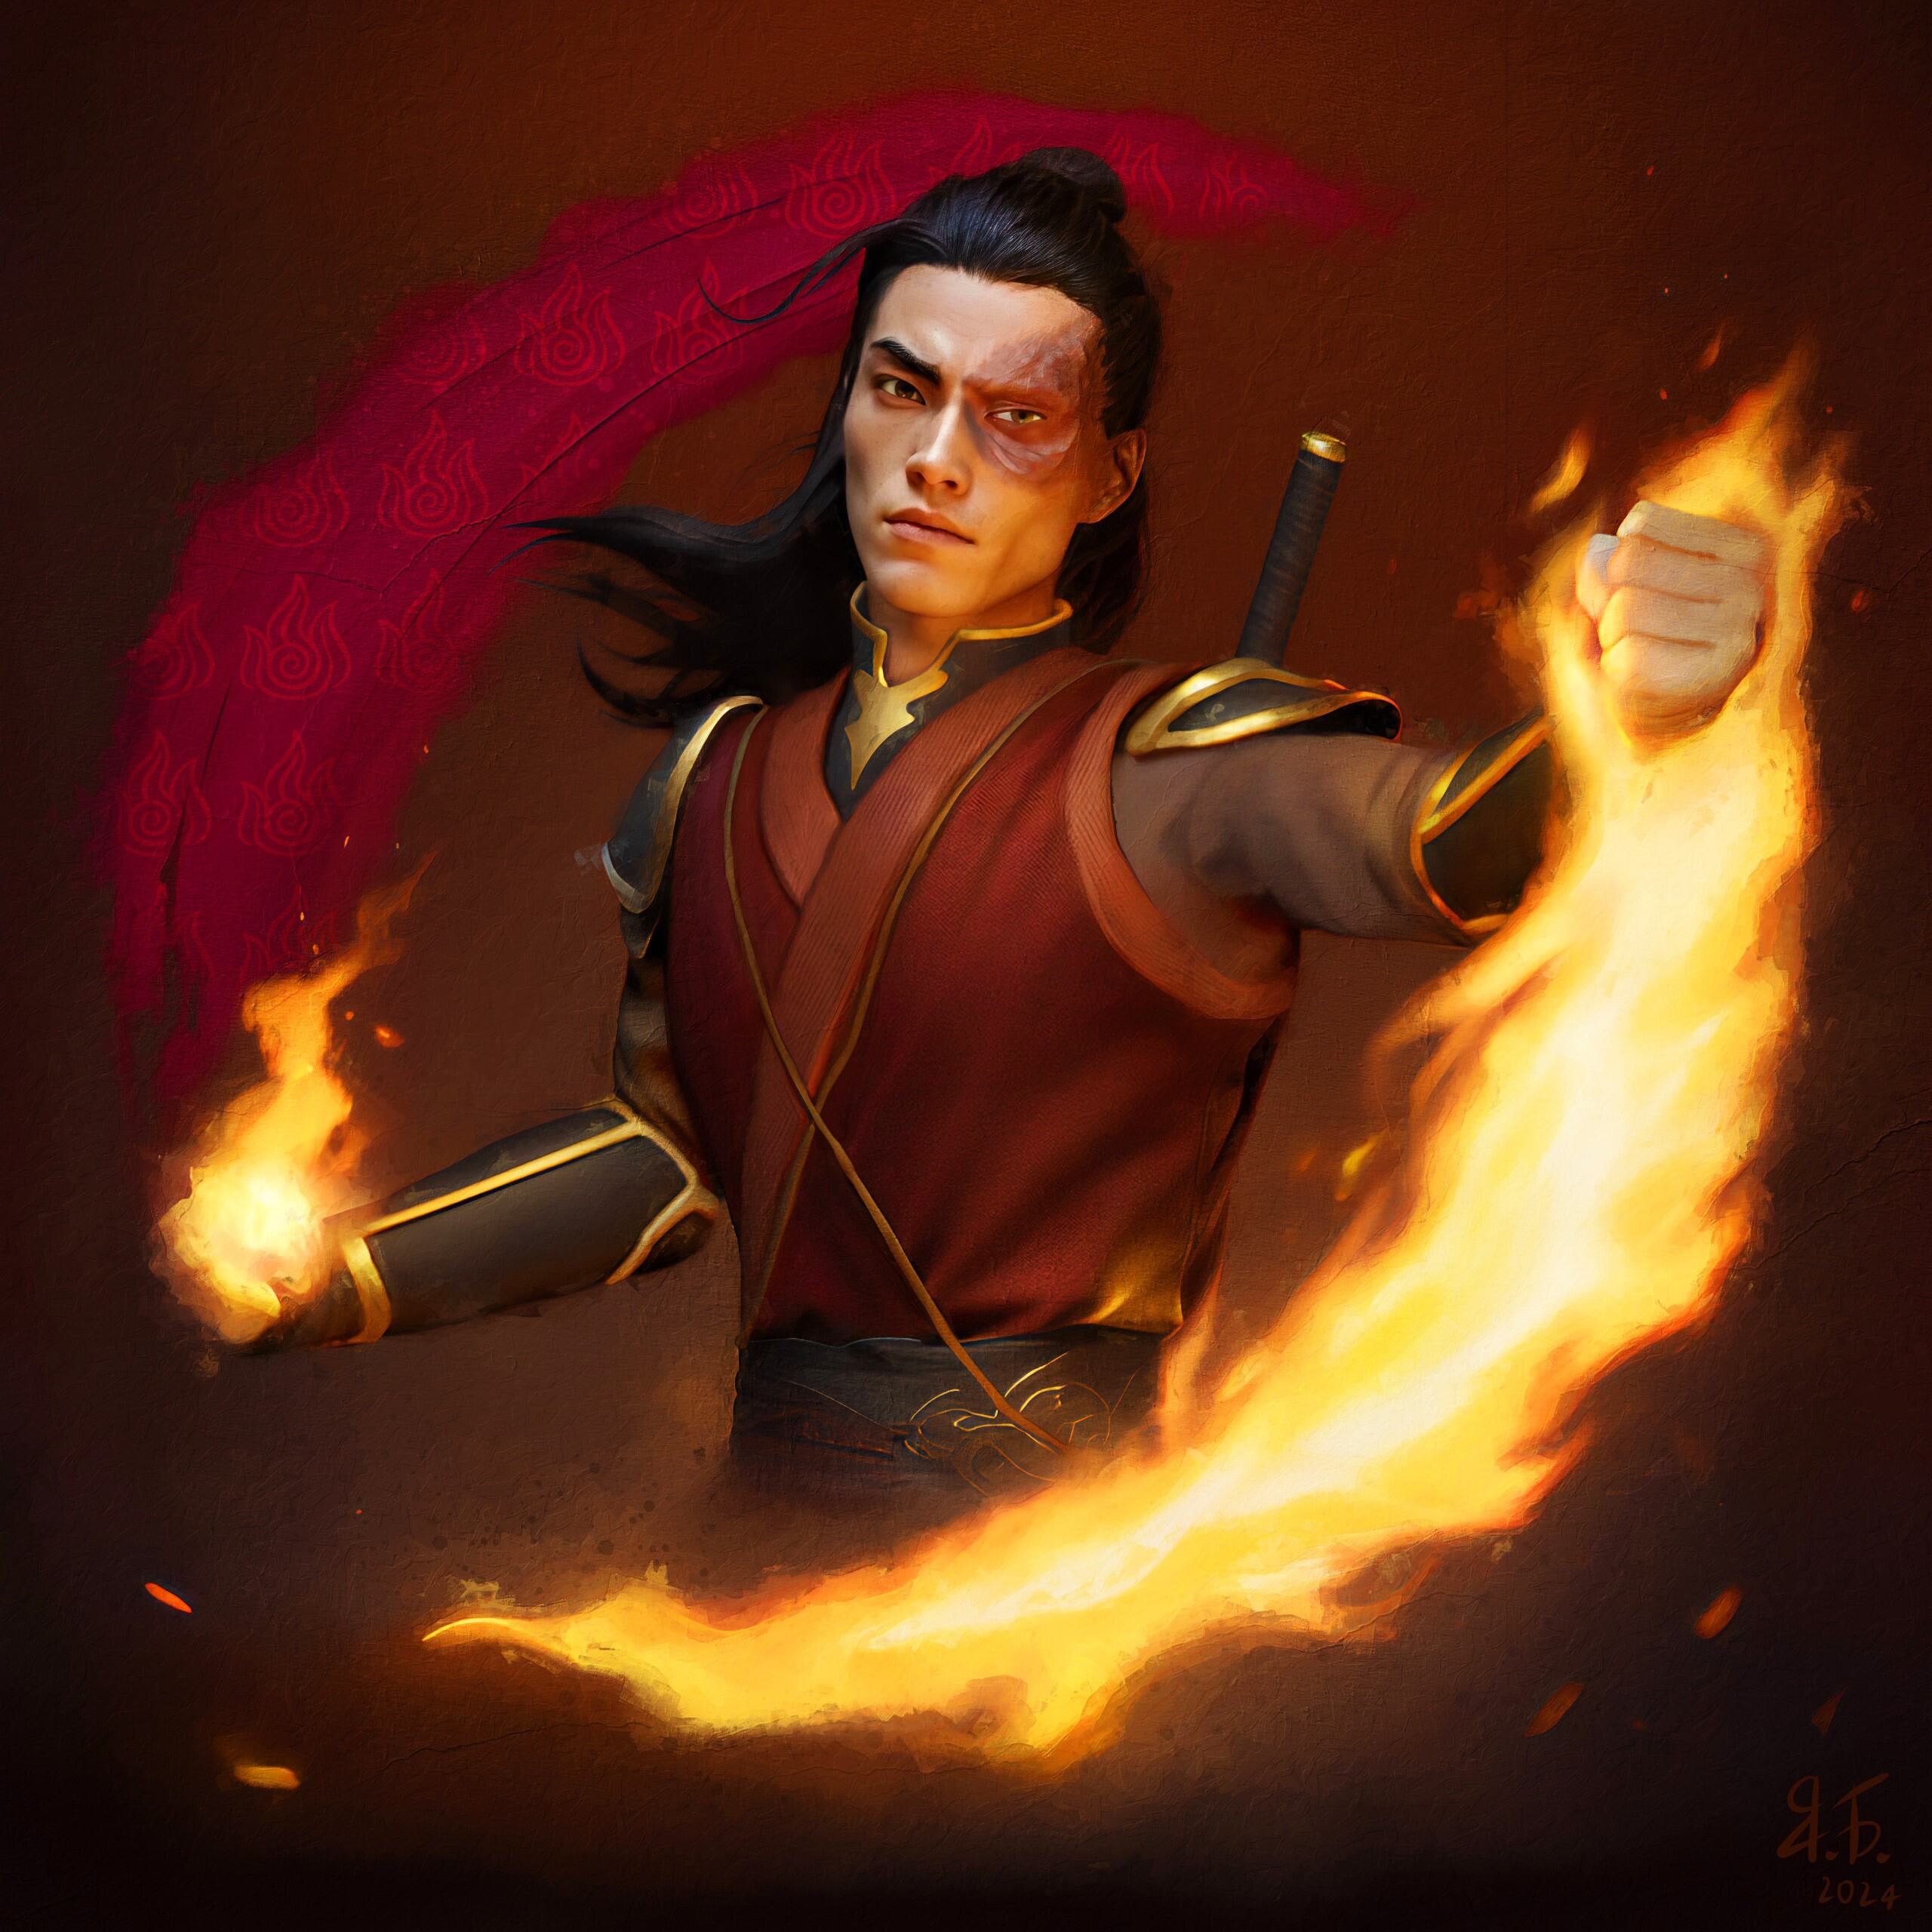 Adult Fire Lord Zuko - Finished Projects - Blender Artists Community